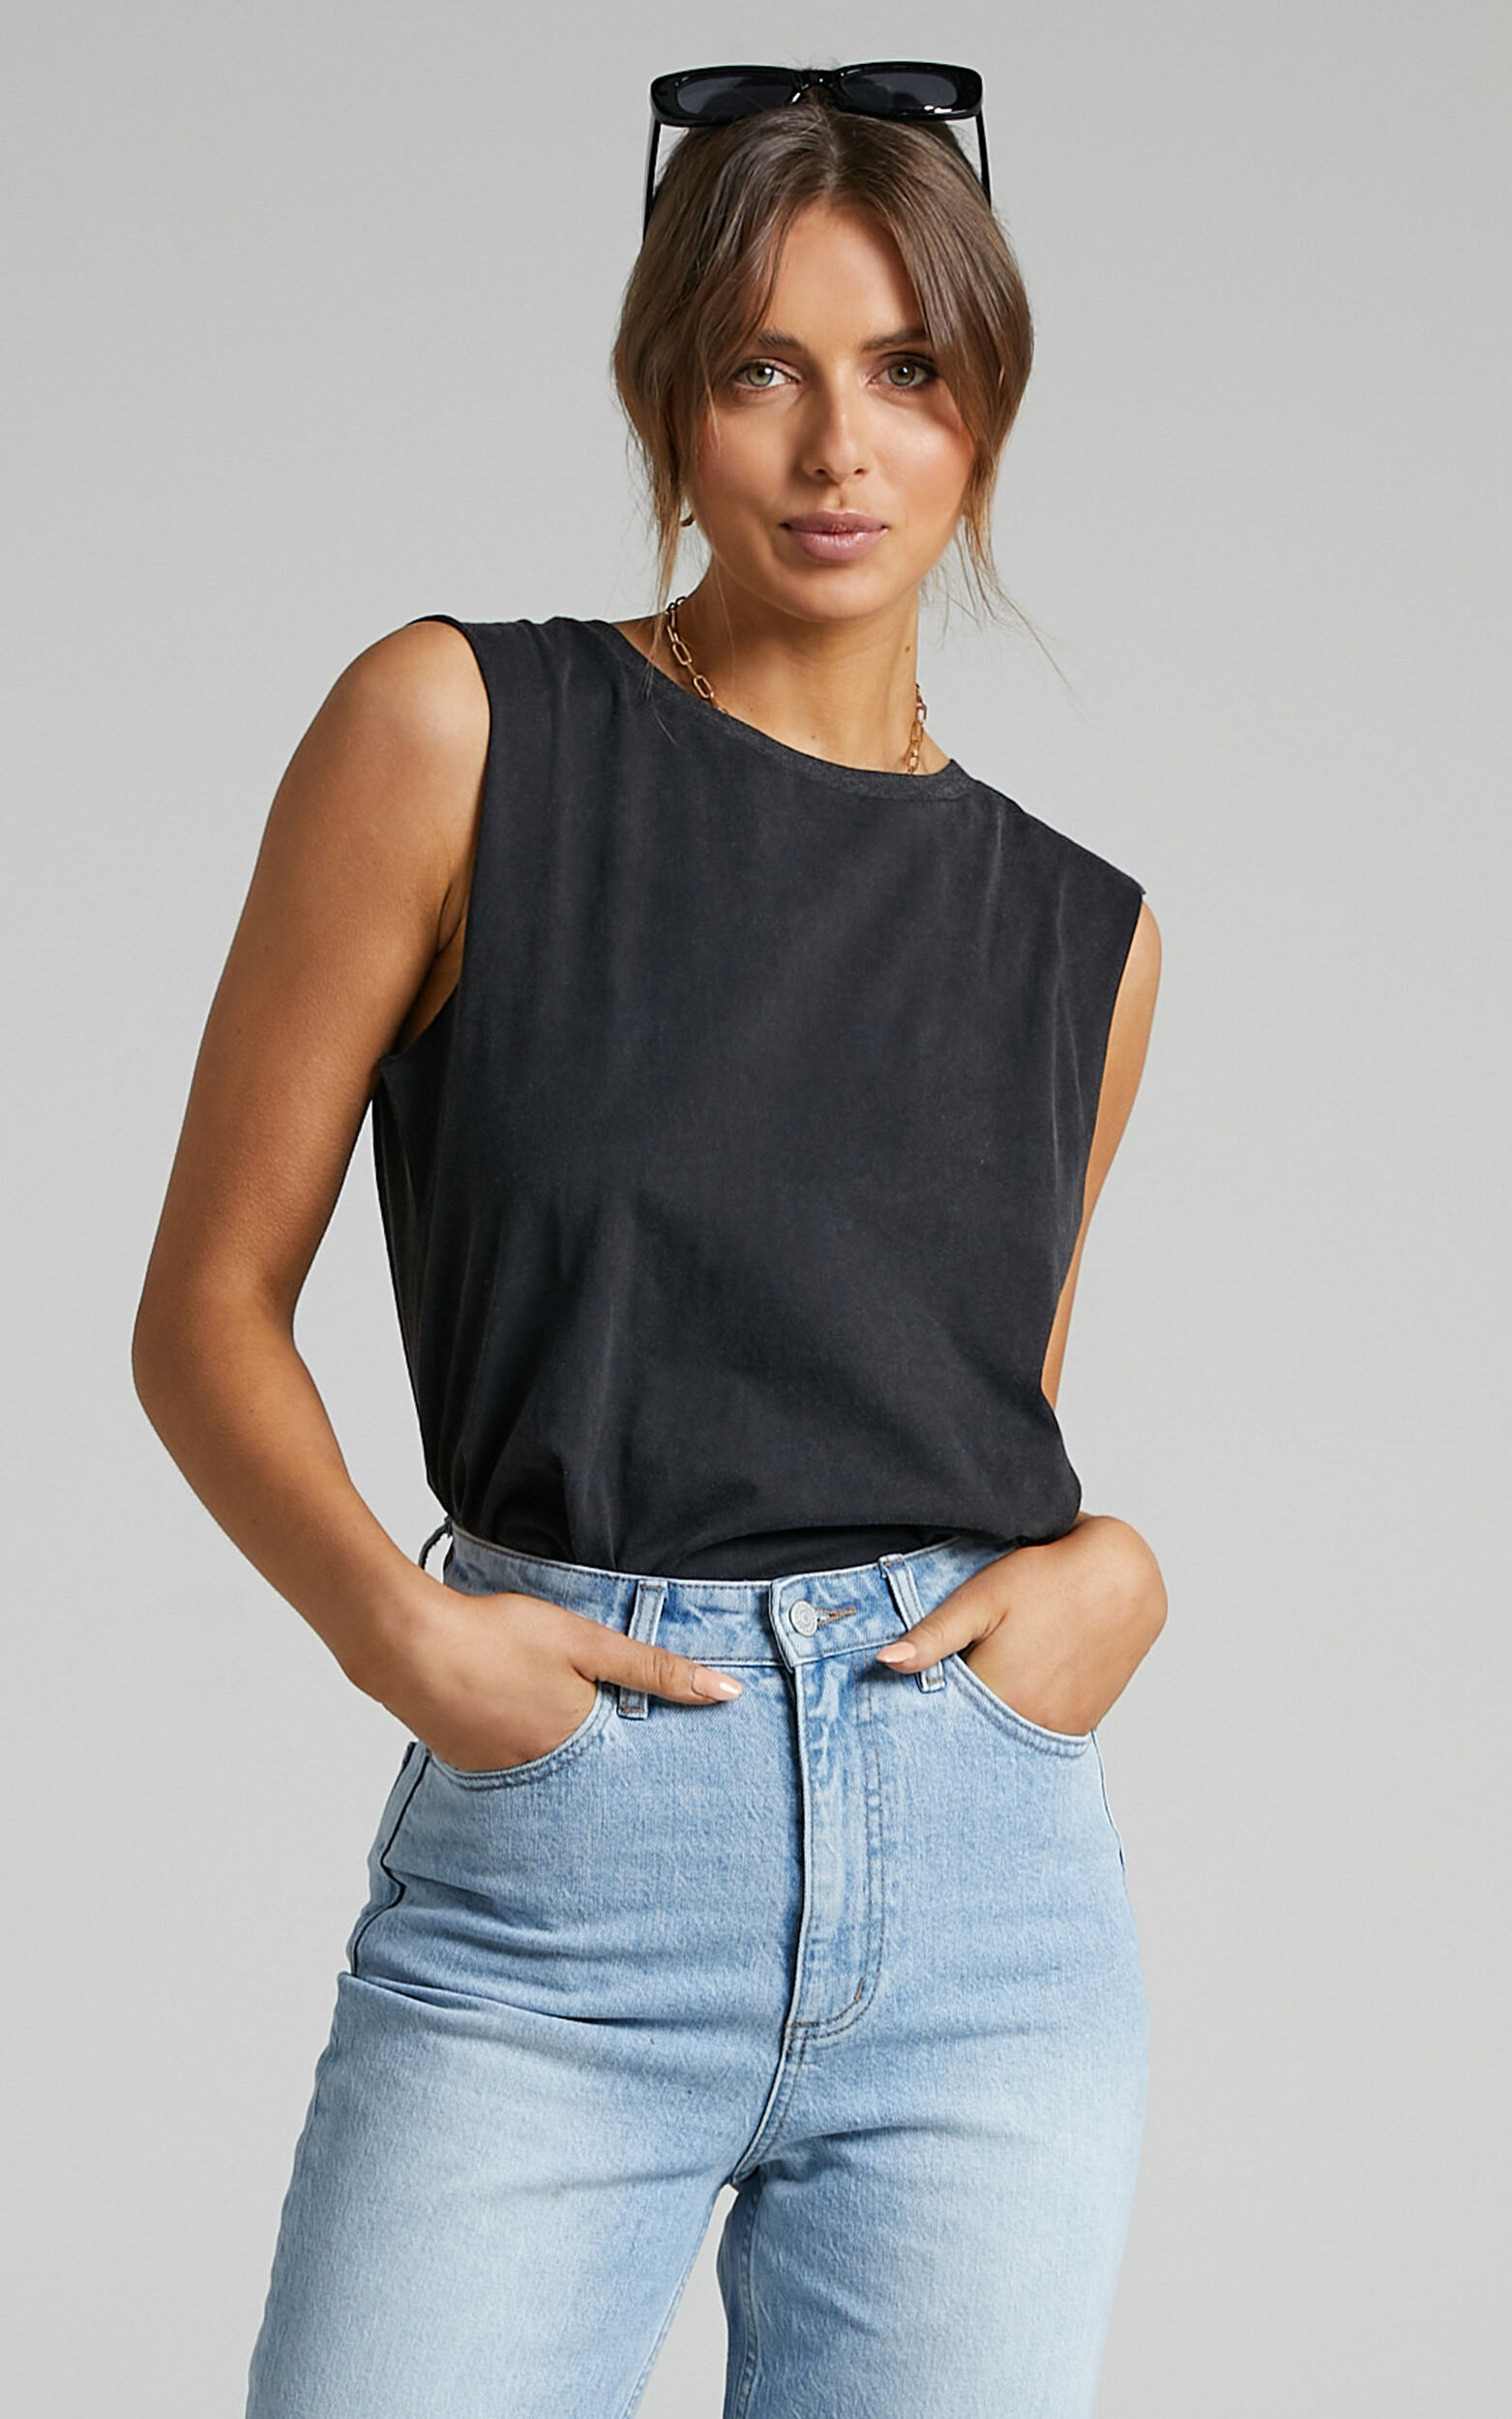 Gia Tee - High Neck Tshirt in Washed Black - 06, BLK1